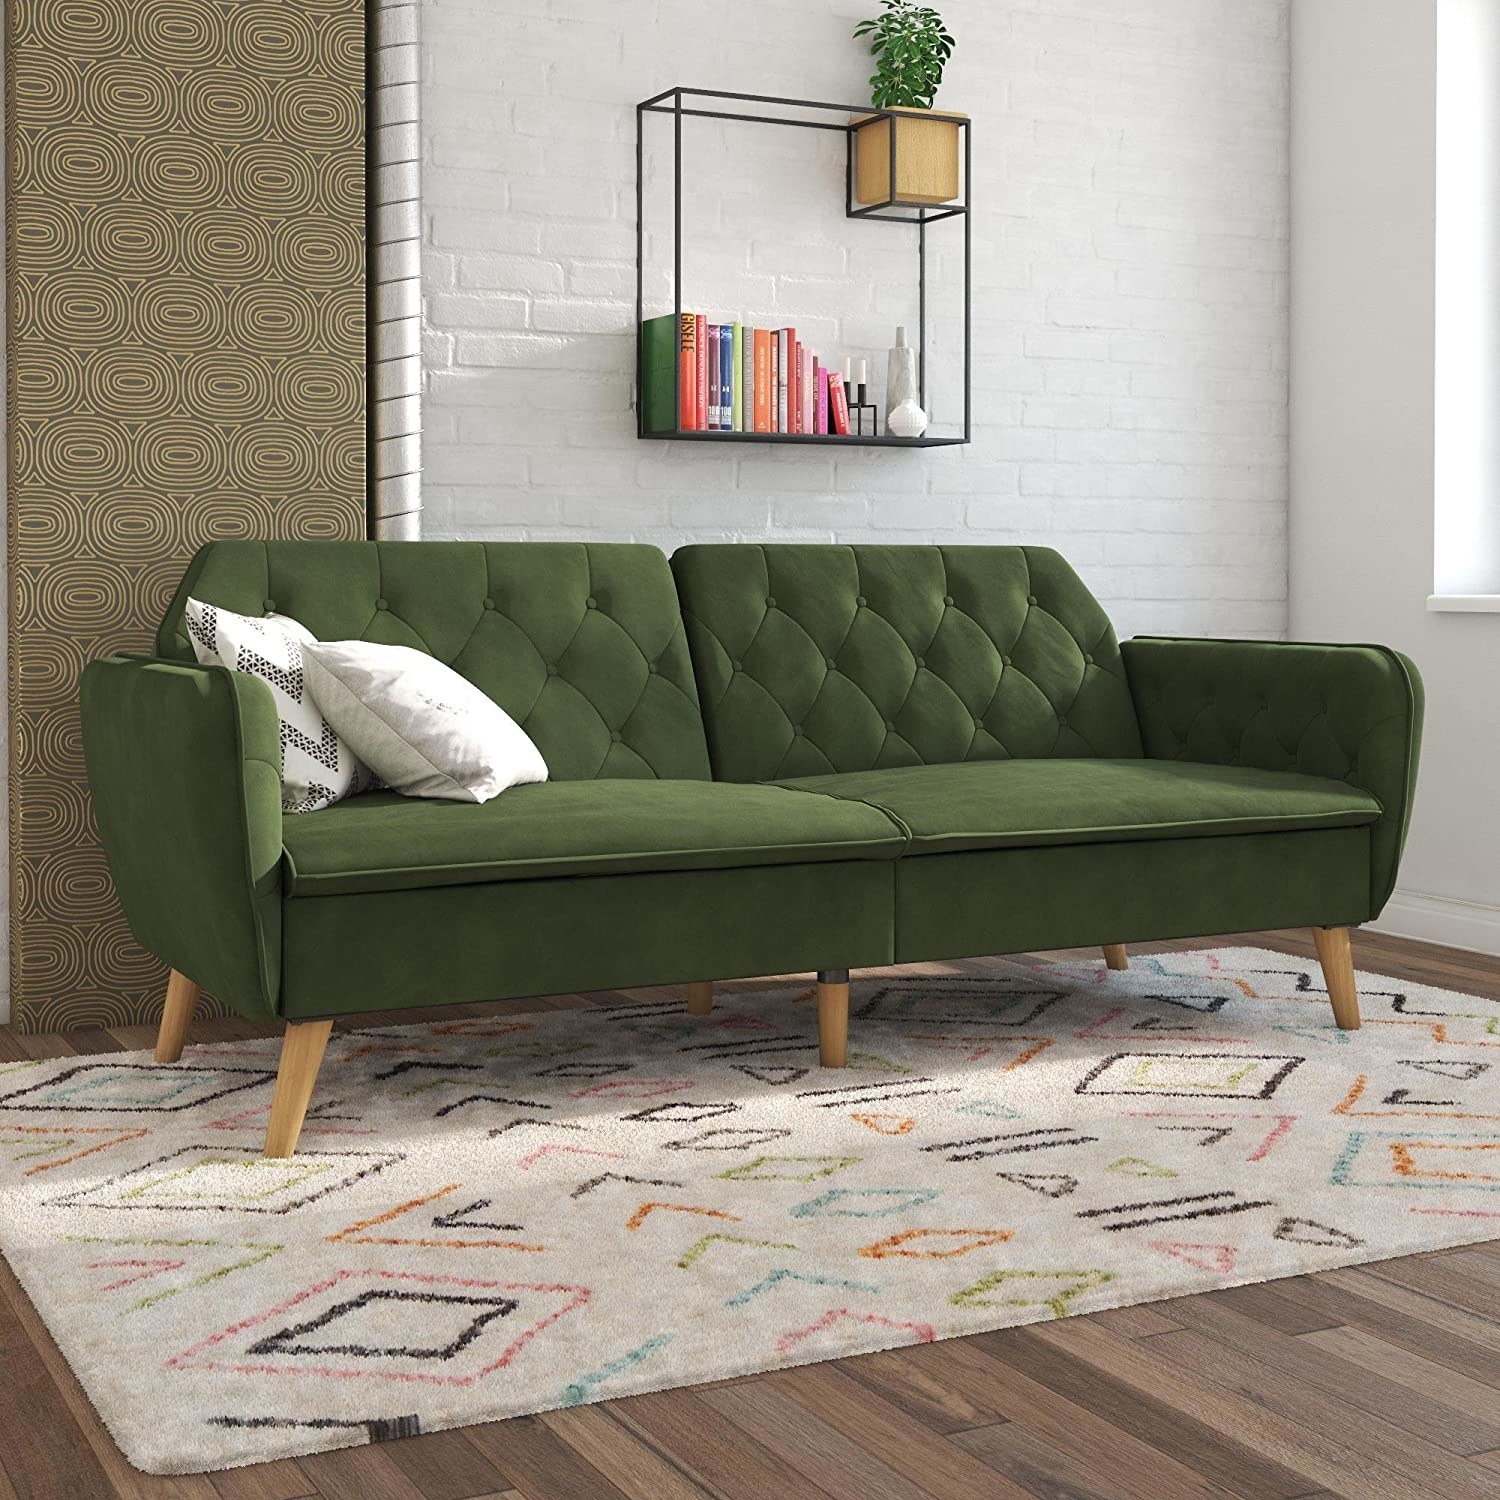 A green couch in a white room with colorful rug